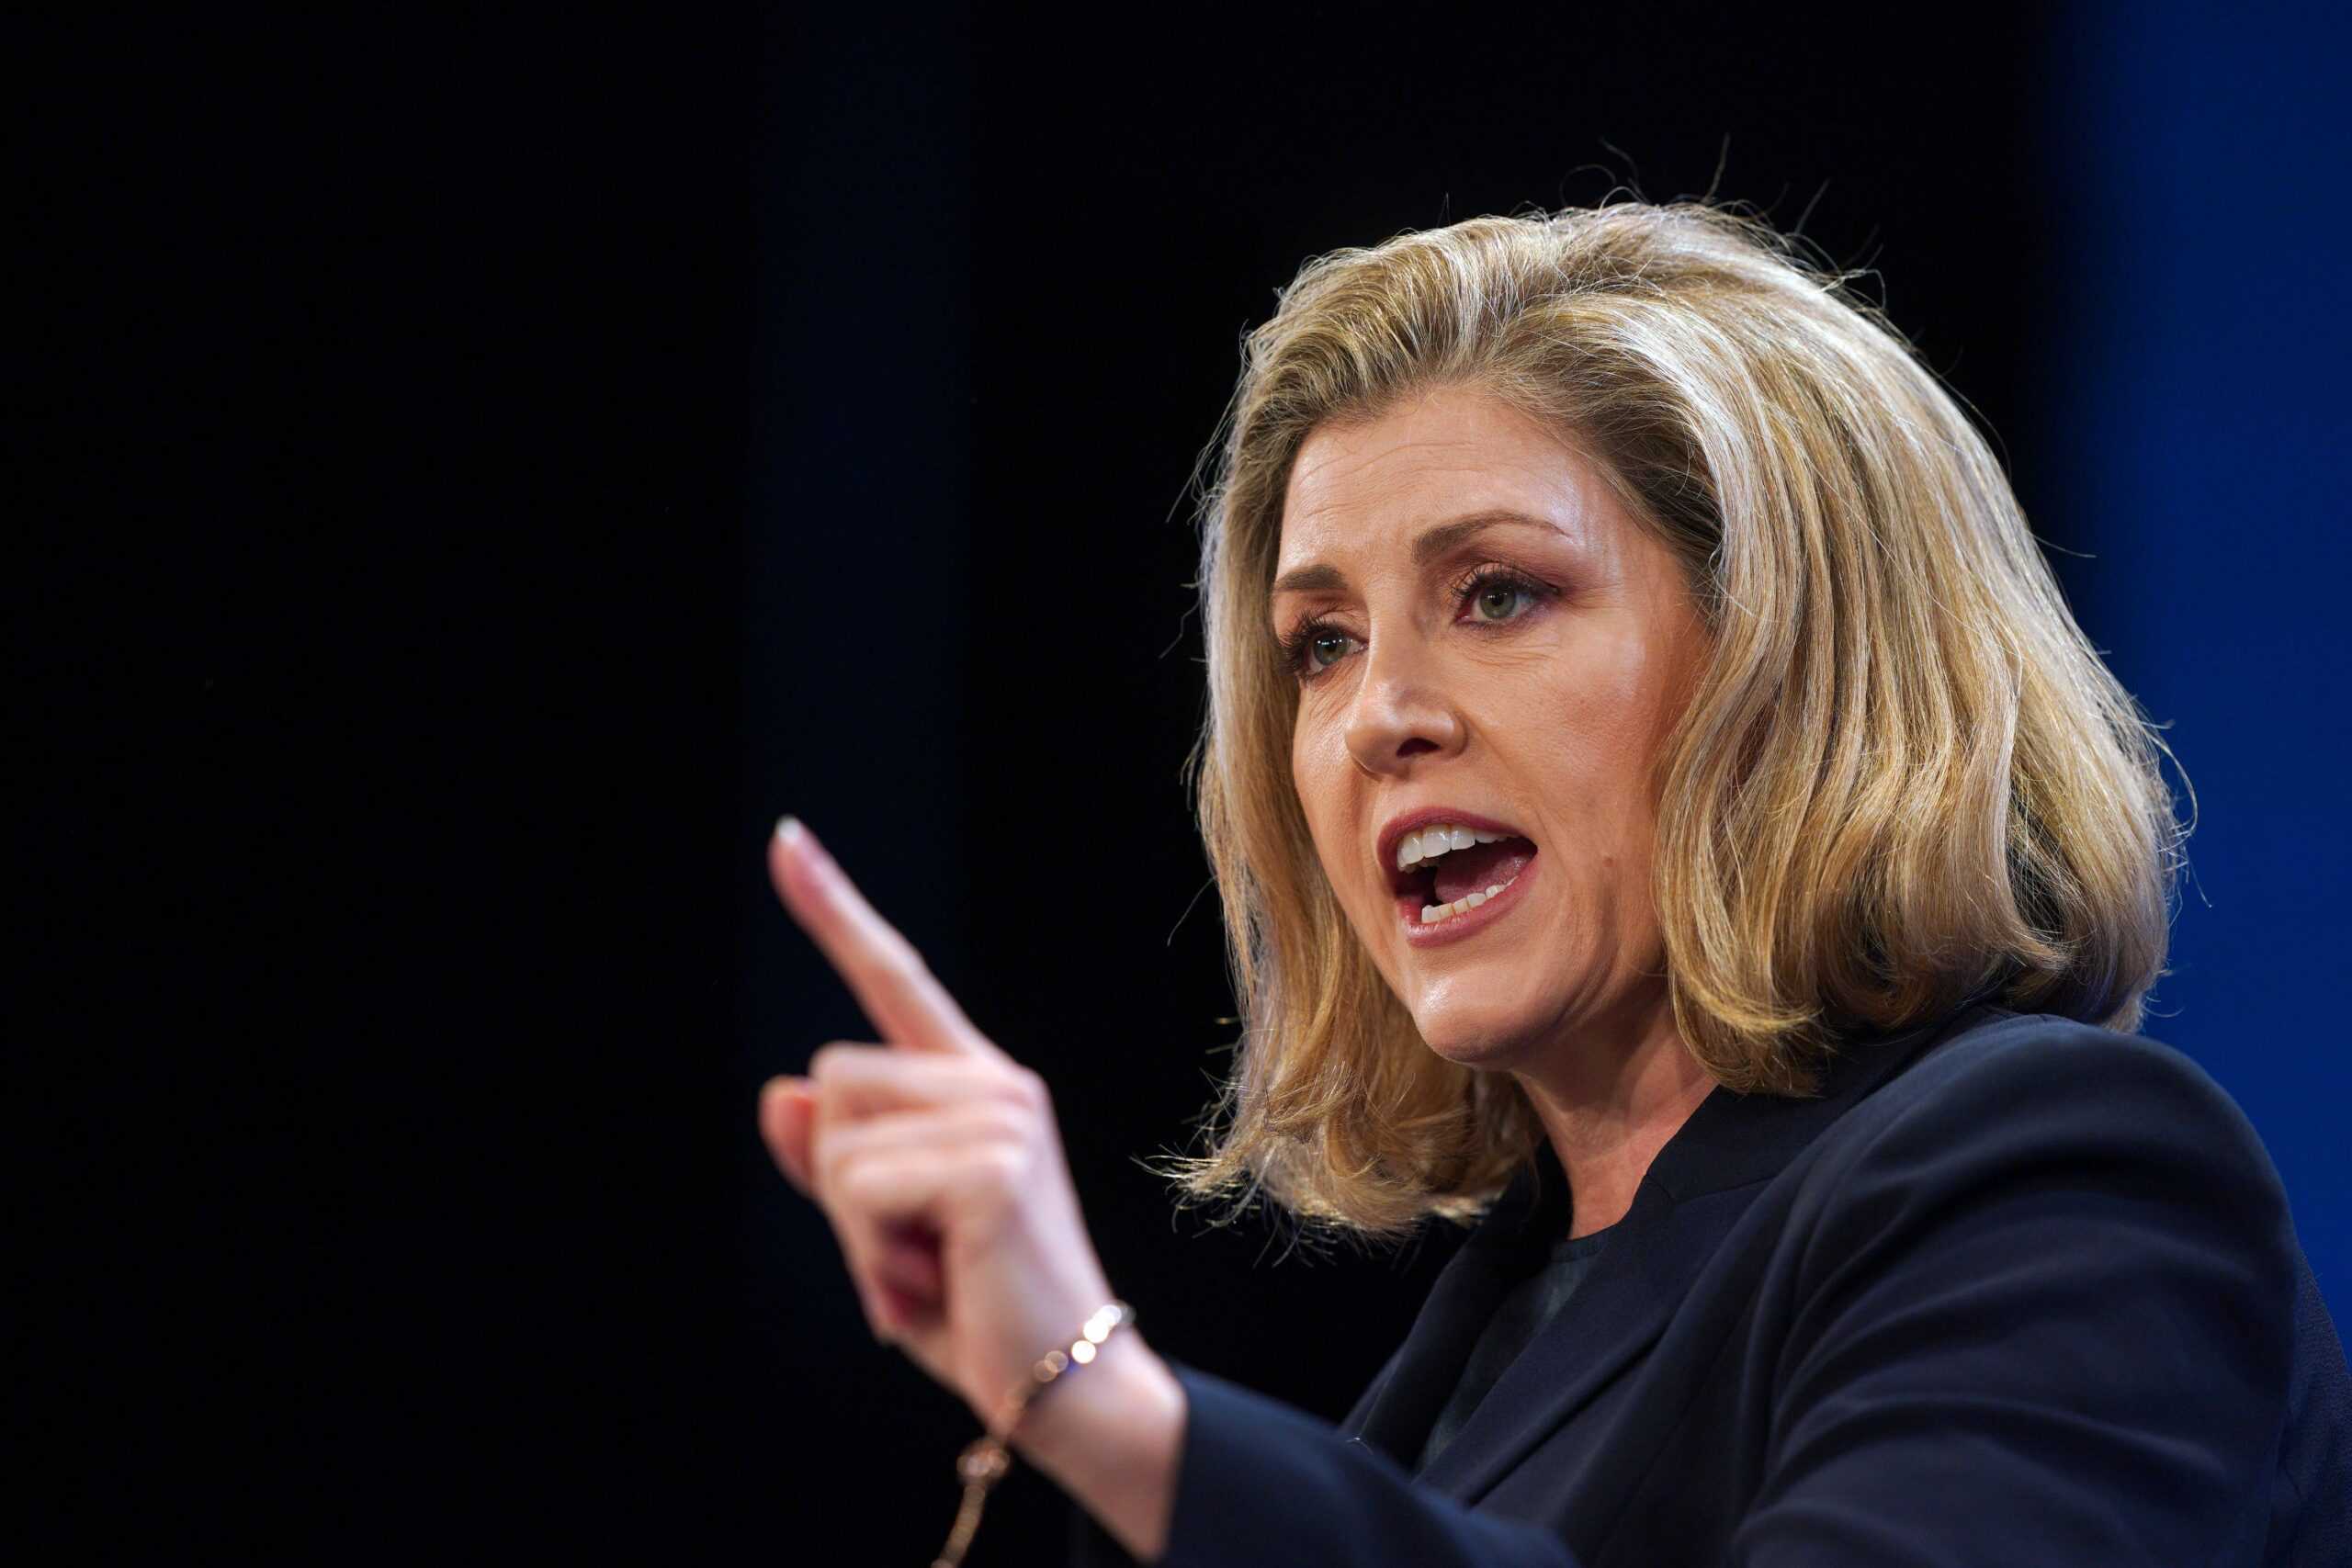 Penny Mordaunt urged to reveal if she is a traitor or faithful amid Tory plots